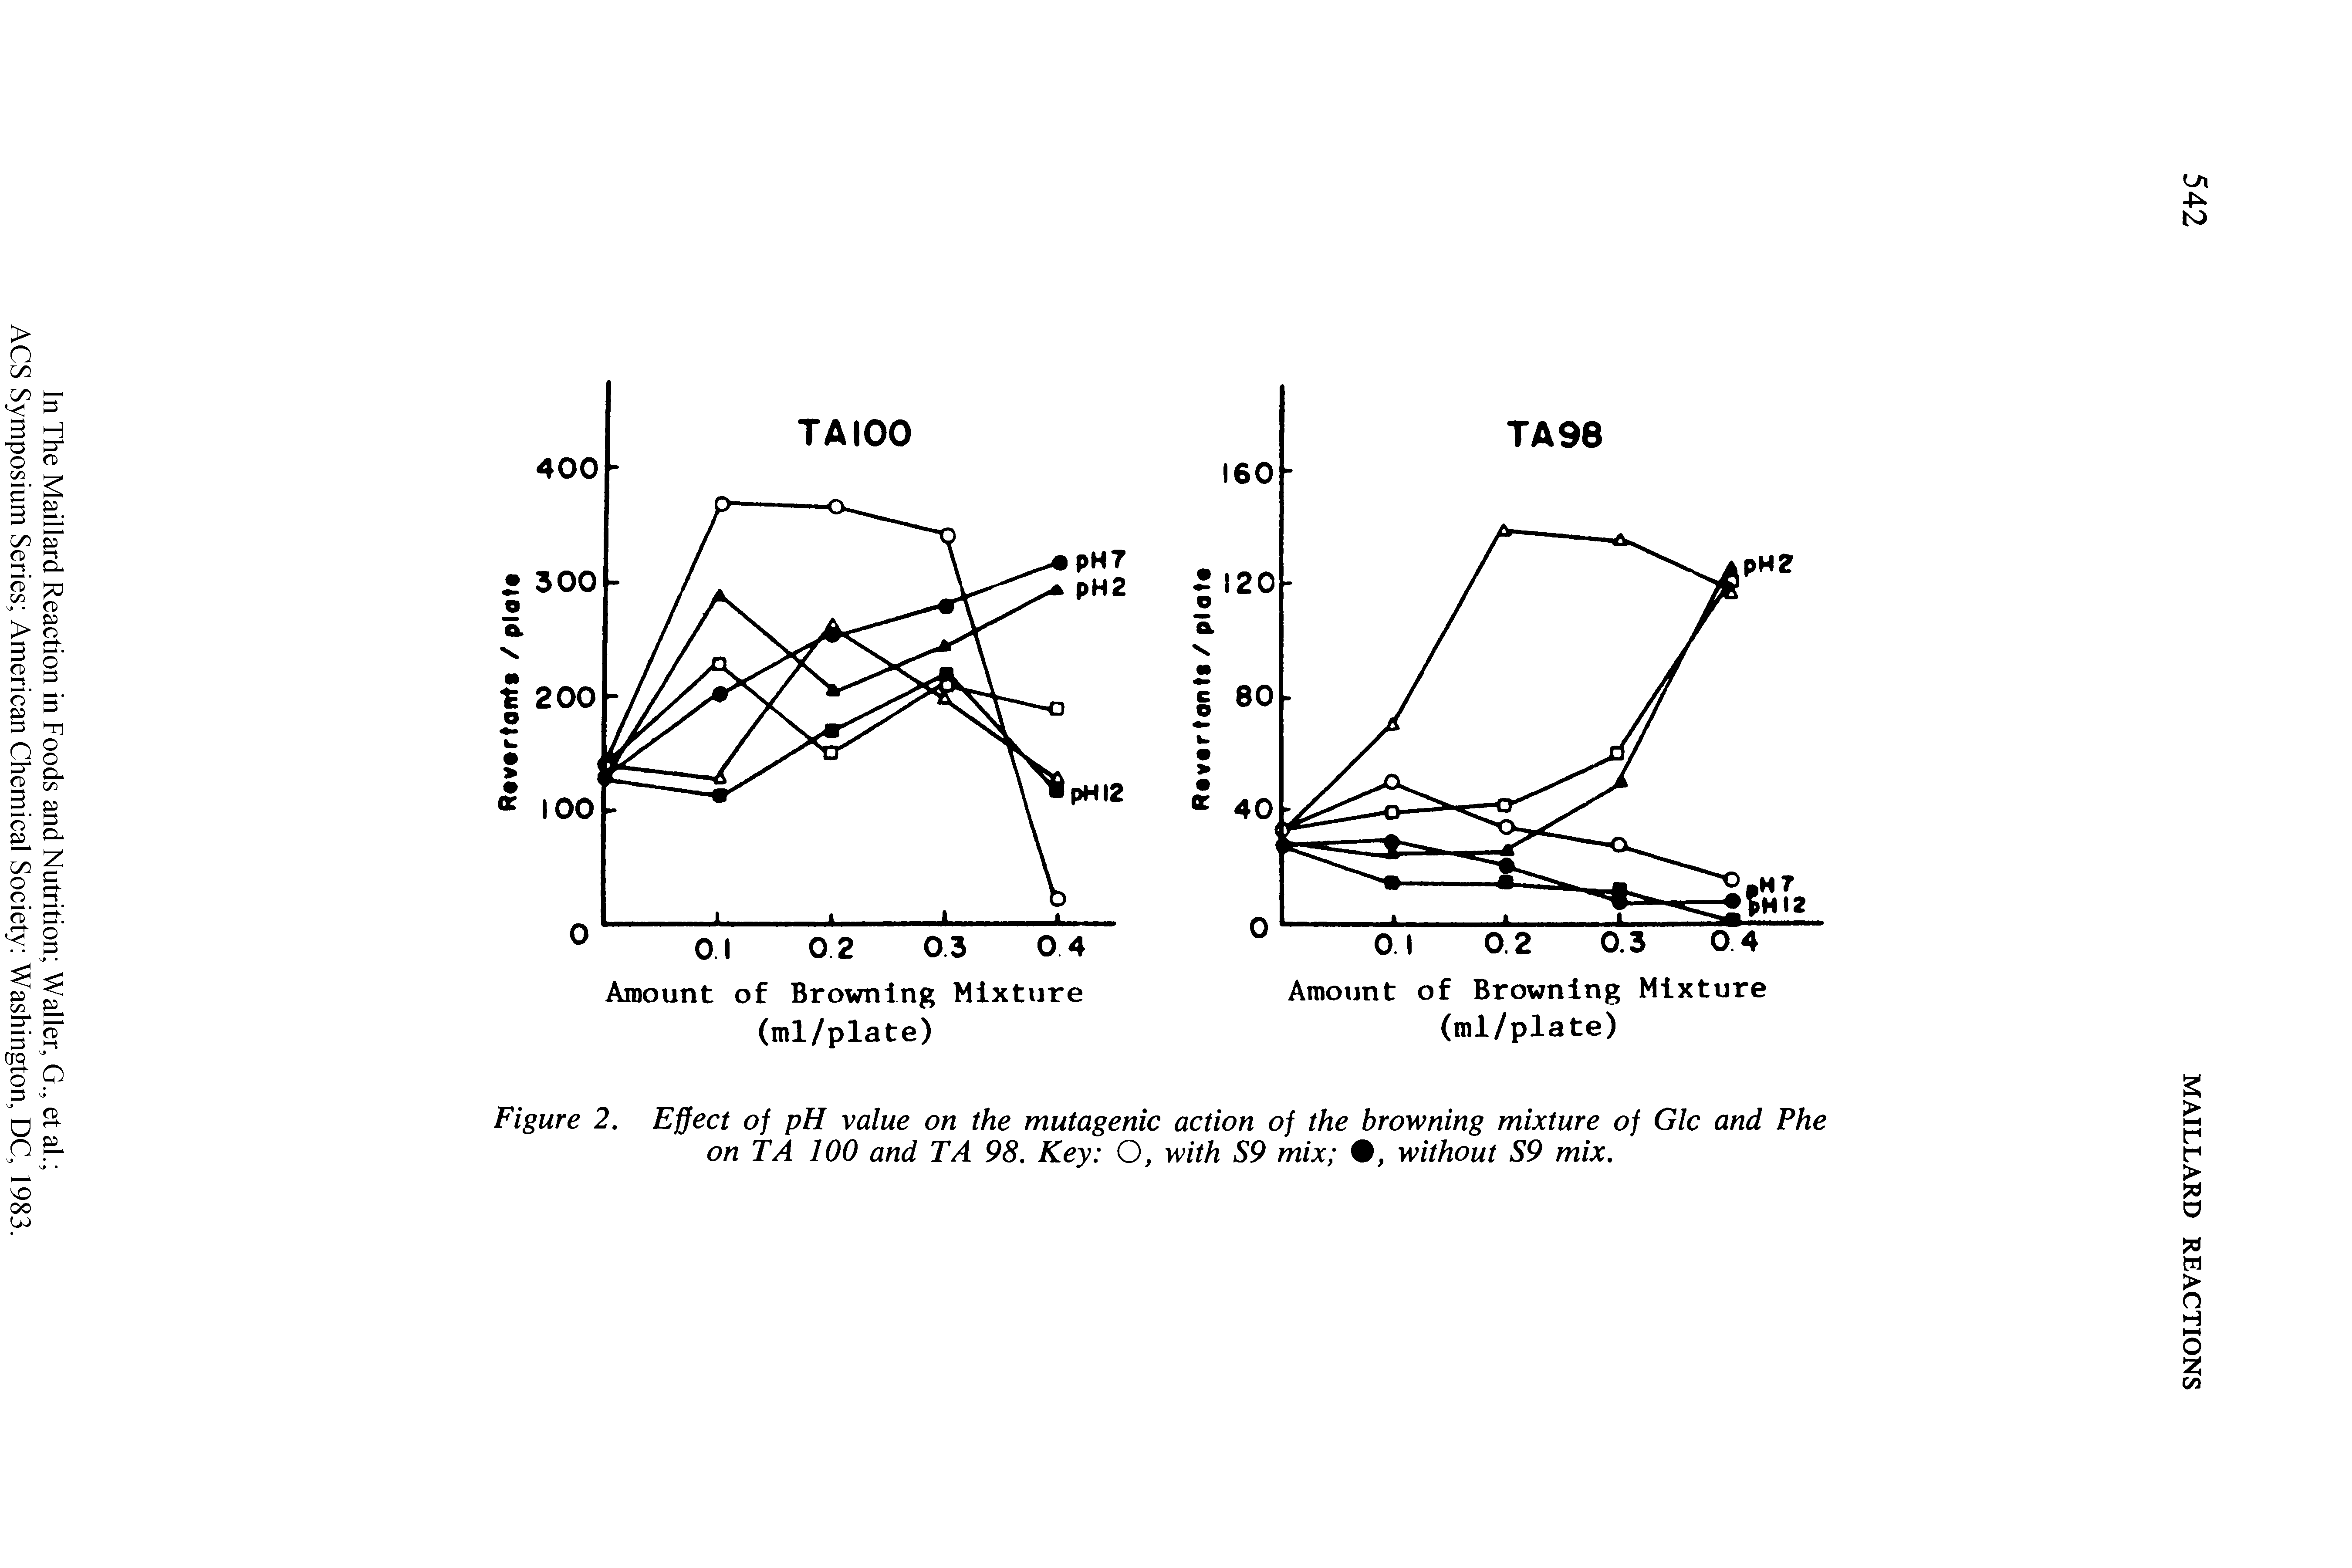 Figure 2. Effect of pH value on the mutagenic action of the browning mixture of Glc and Phe on TA 100 and TA 98. Key O, with S9 mix without S9 mix.